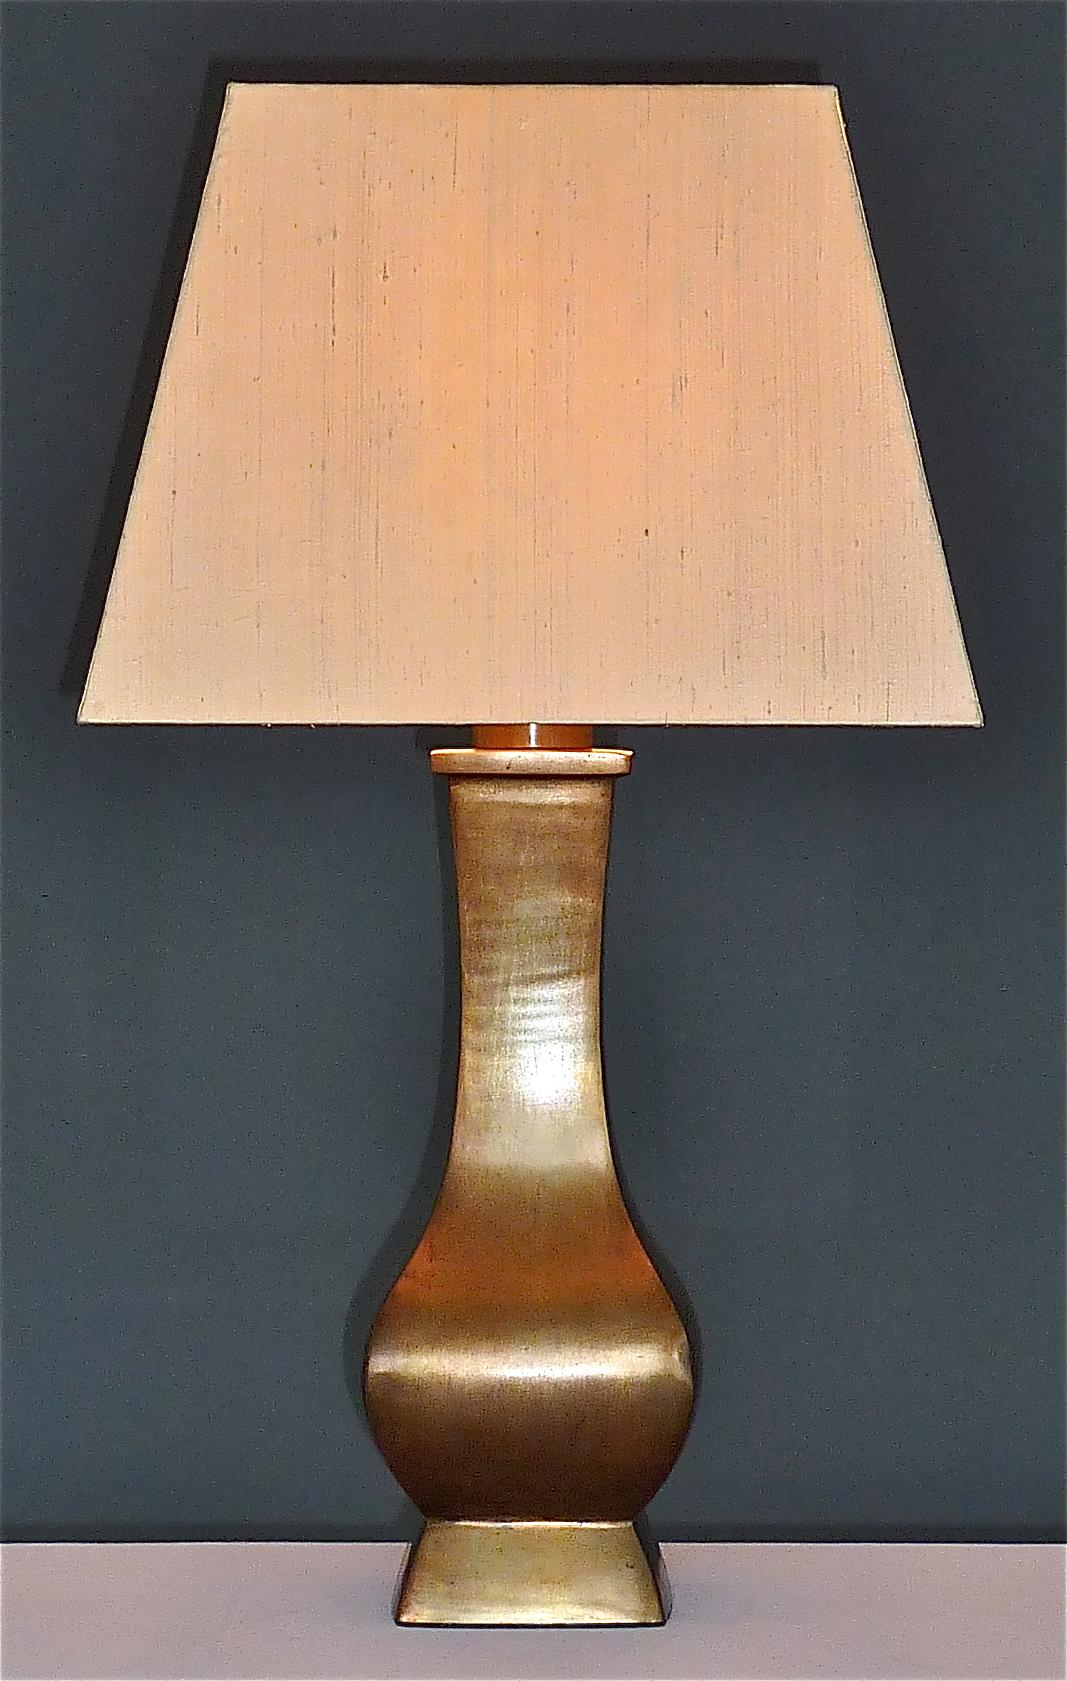 Exceptional huge and stunning patinated heavy bronze table lamp with attribution to Maison Jansen, France around 1960 to 1970s and very in the style of Maria Pergay and Gabriella Crespi. The slightly rounded square base stand measures 15 x 15 cm /